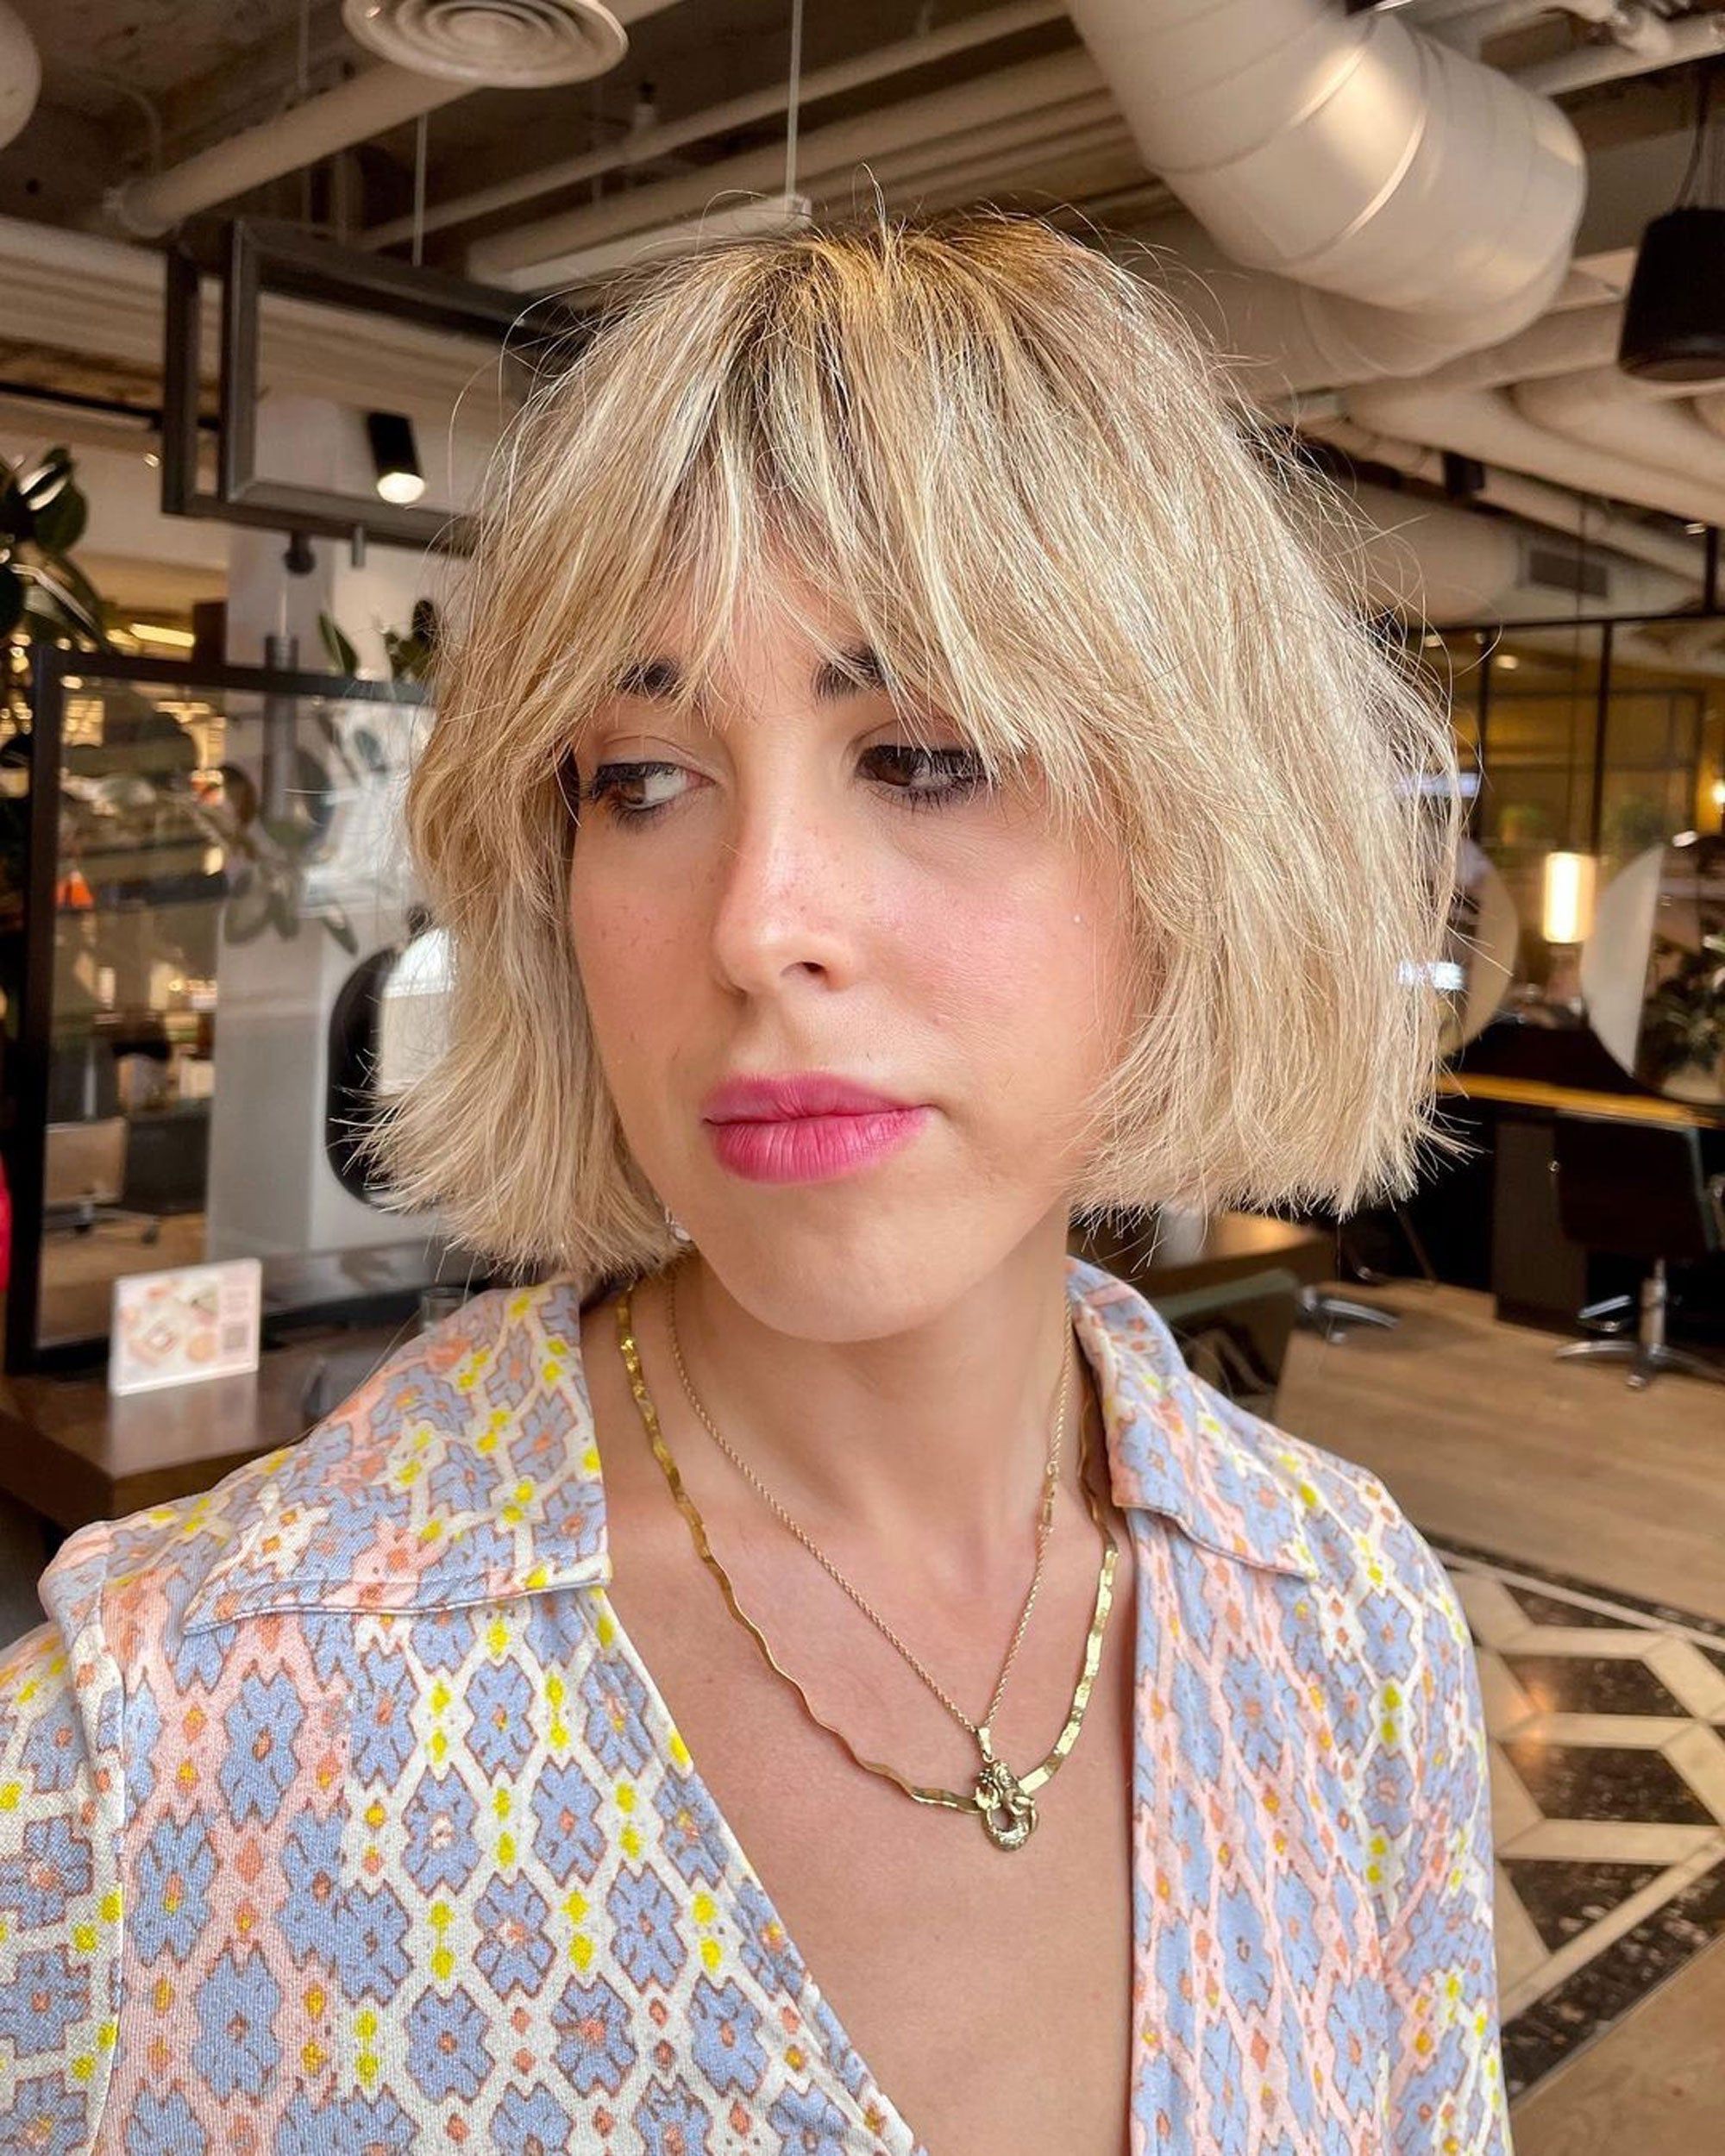 Bob Haircut Trends 2022: Long, Boyfriend, Lob Styles Intended For Below The Shoulders Textured Haircut (View 25 of 25)